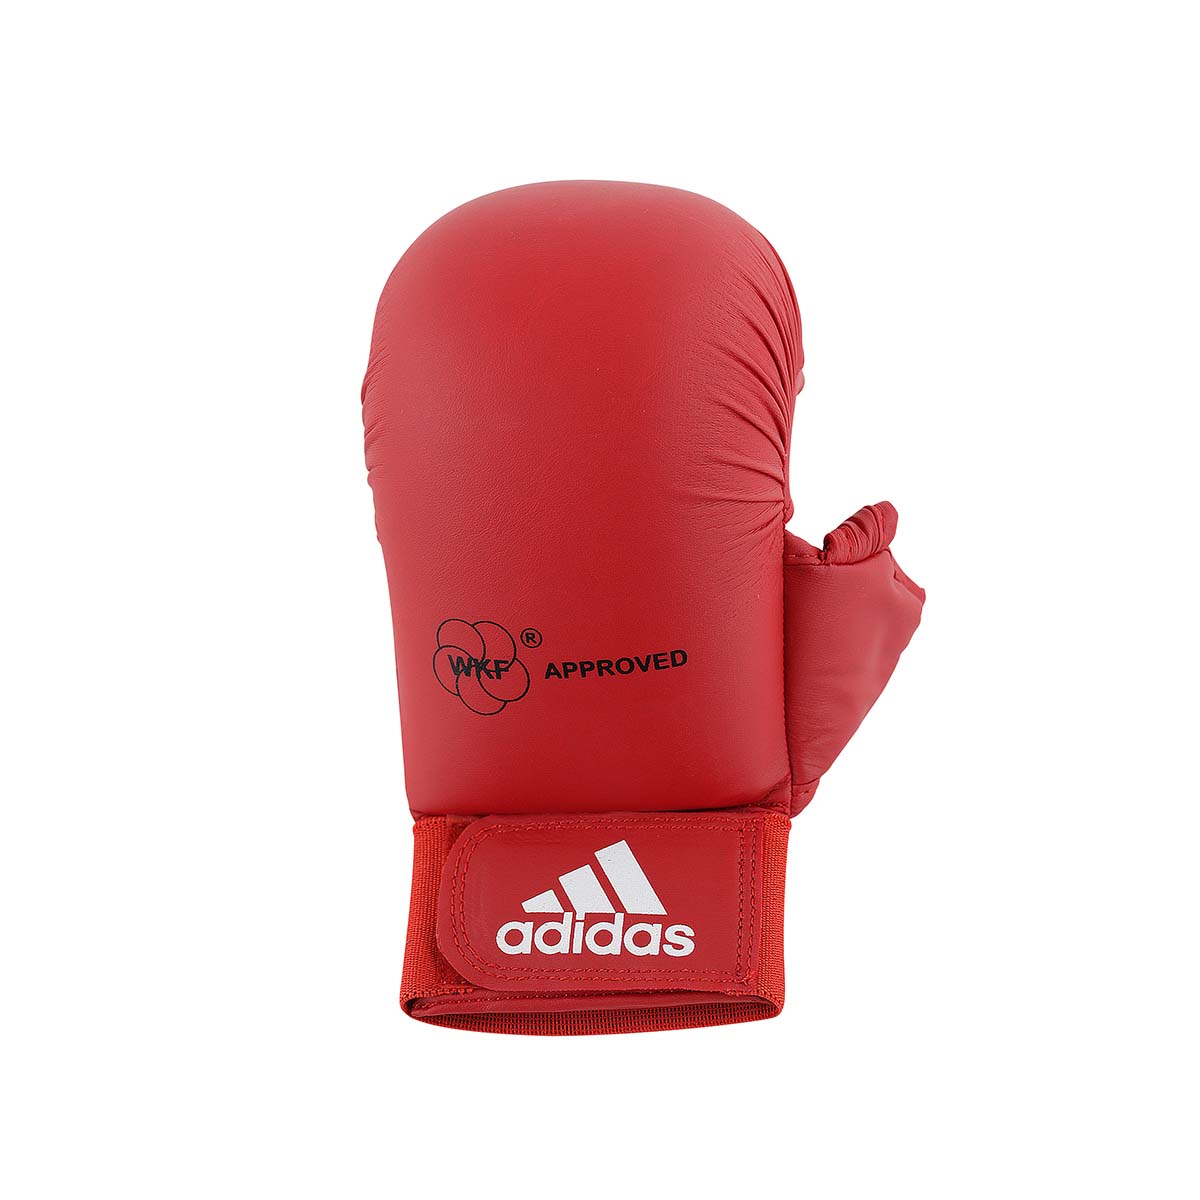 Adidas Karate Mitts WKF Approved-3142